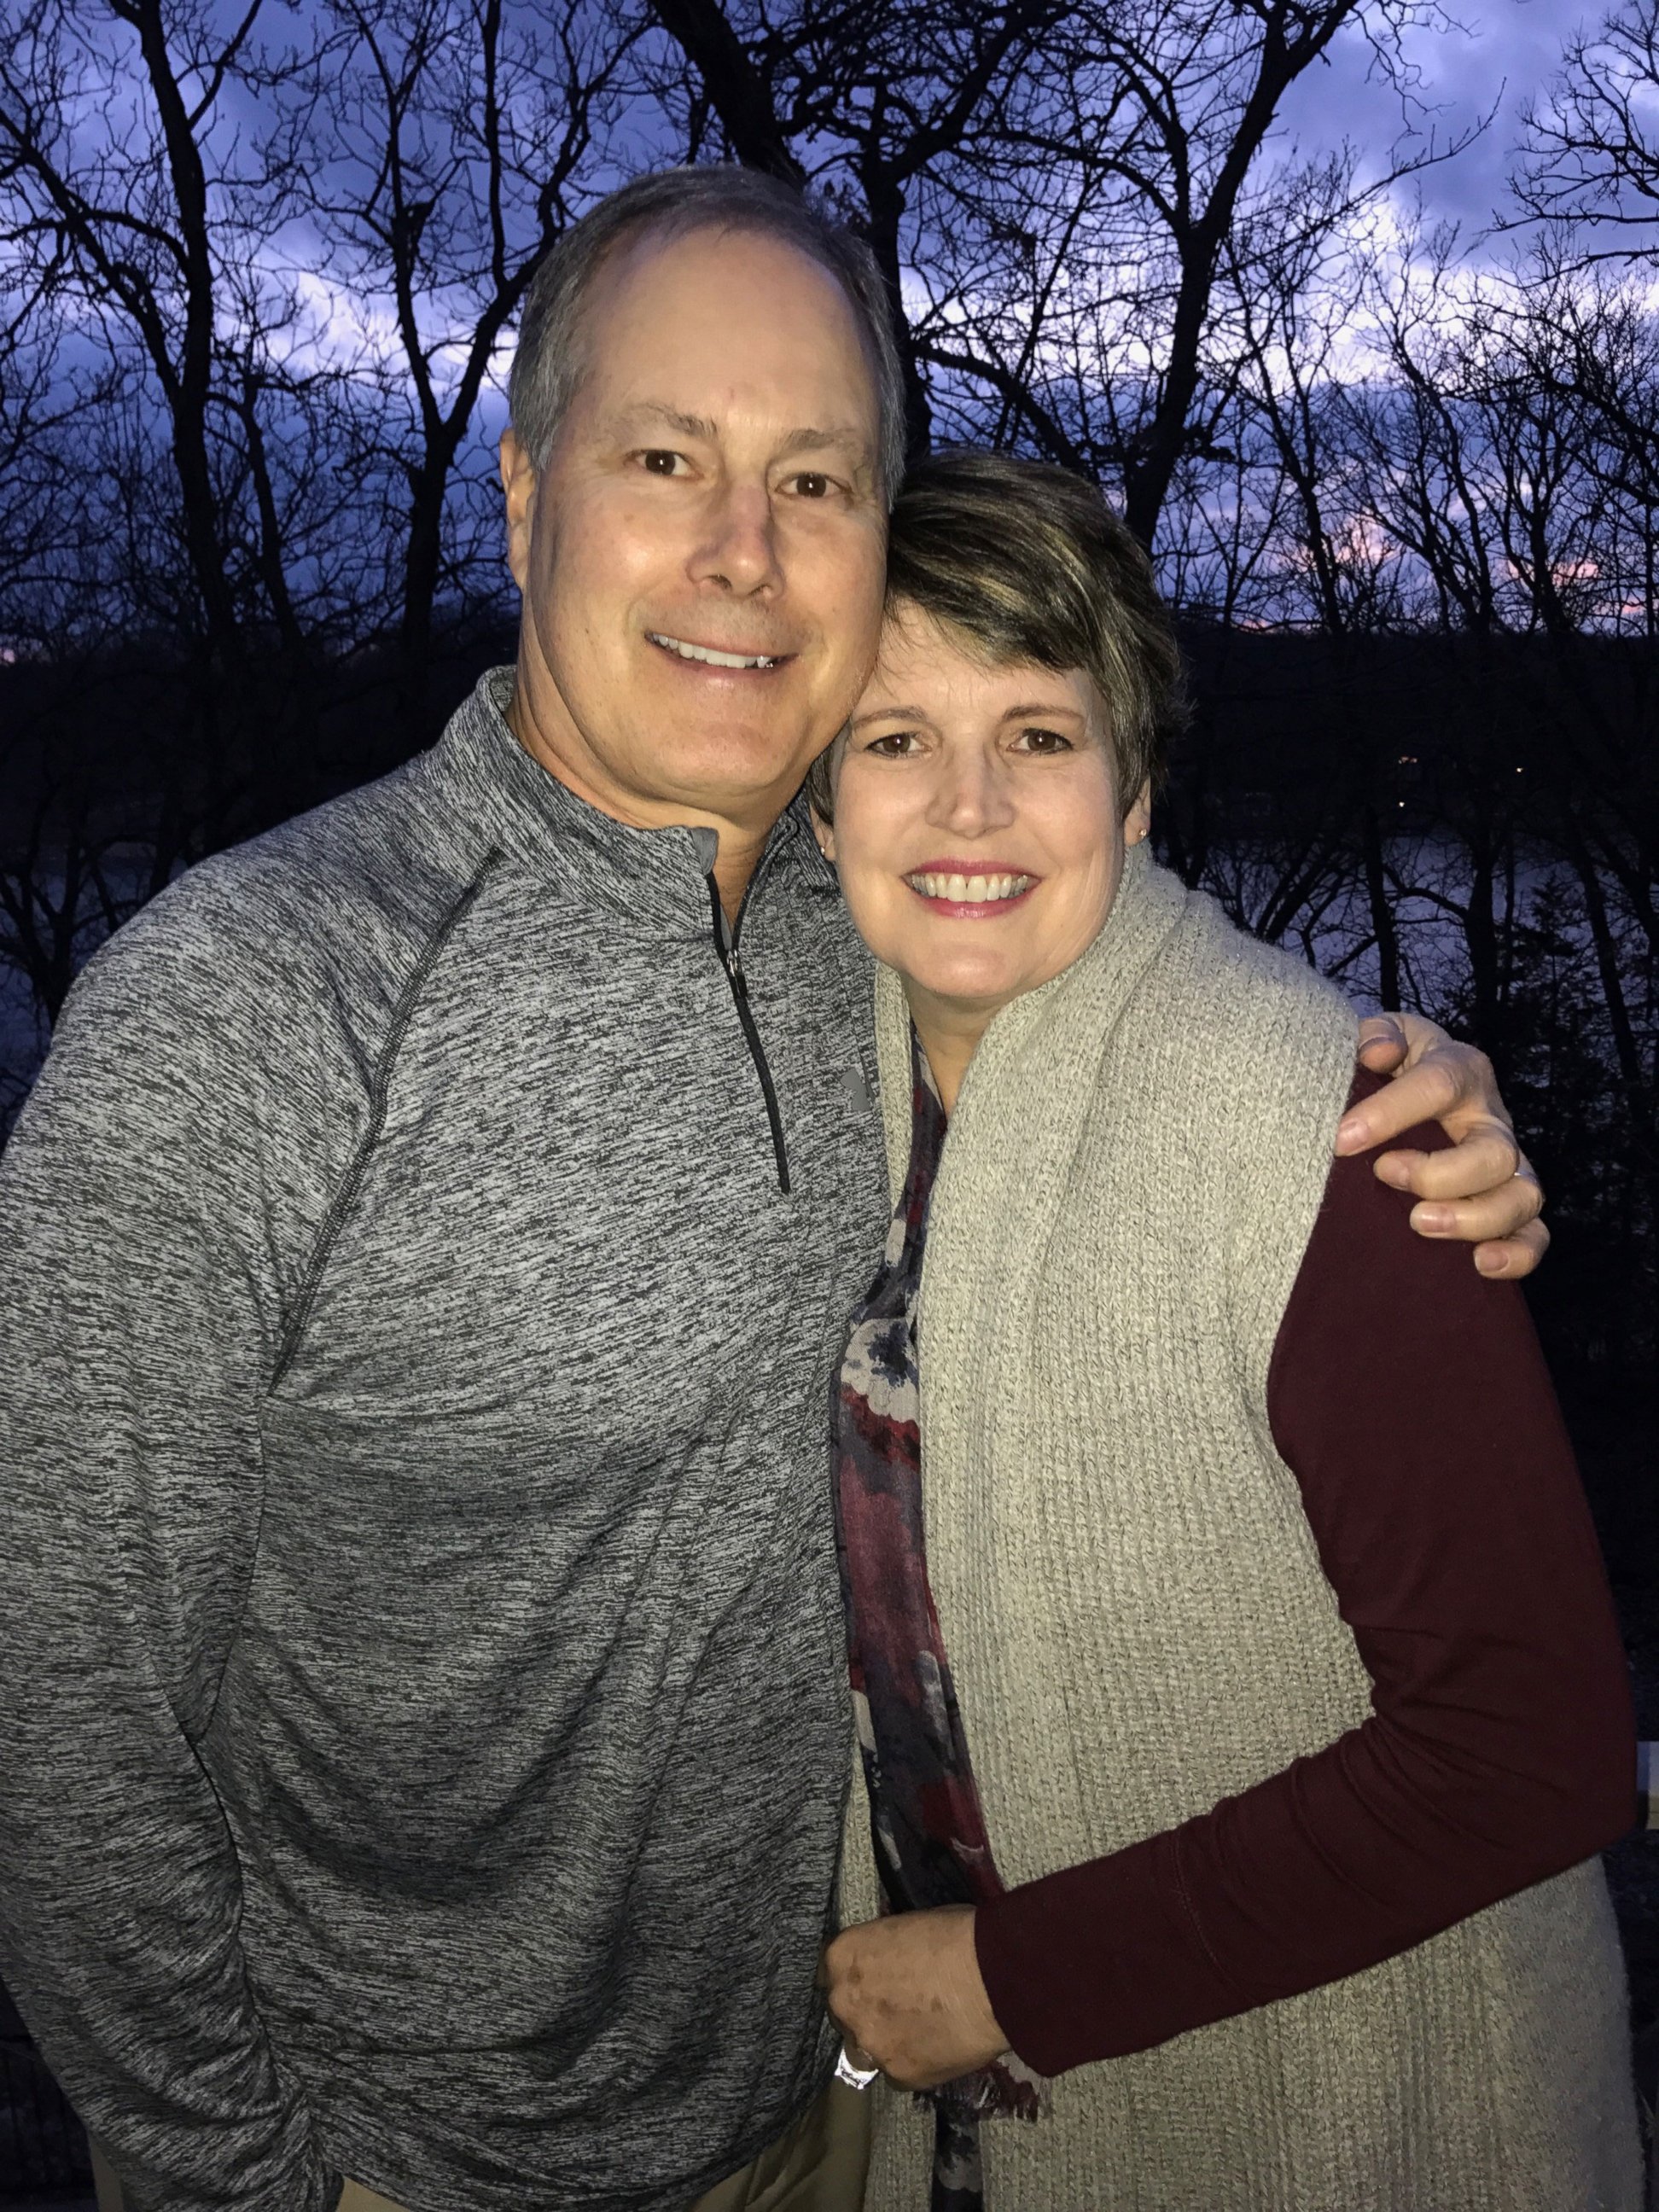 PHOTO: Jim Koch, 60, of Panora, Iowa, proposed to wife Lora Koch again on Feb. 28, 2017, just one week after her mastectomy surgery. 
